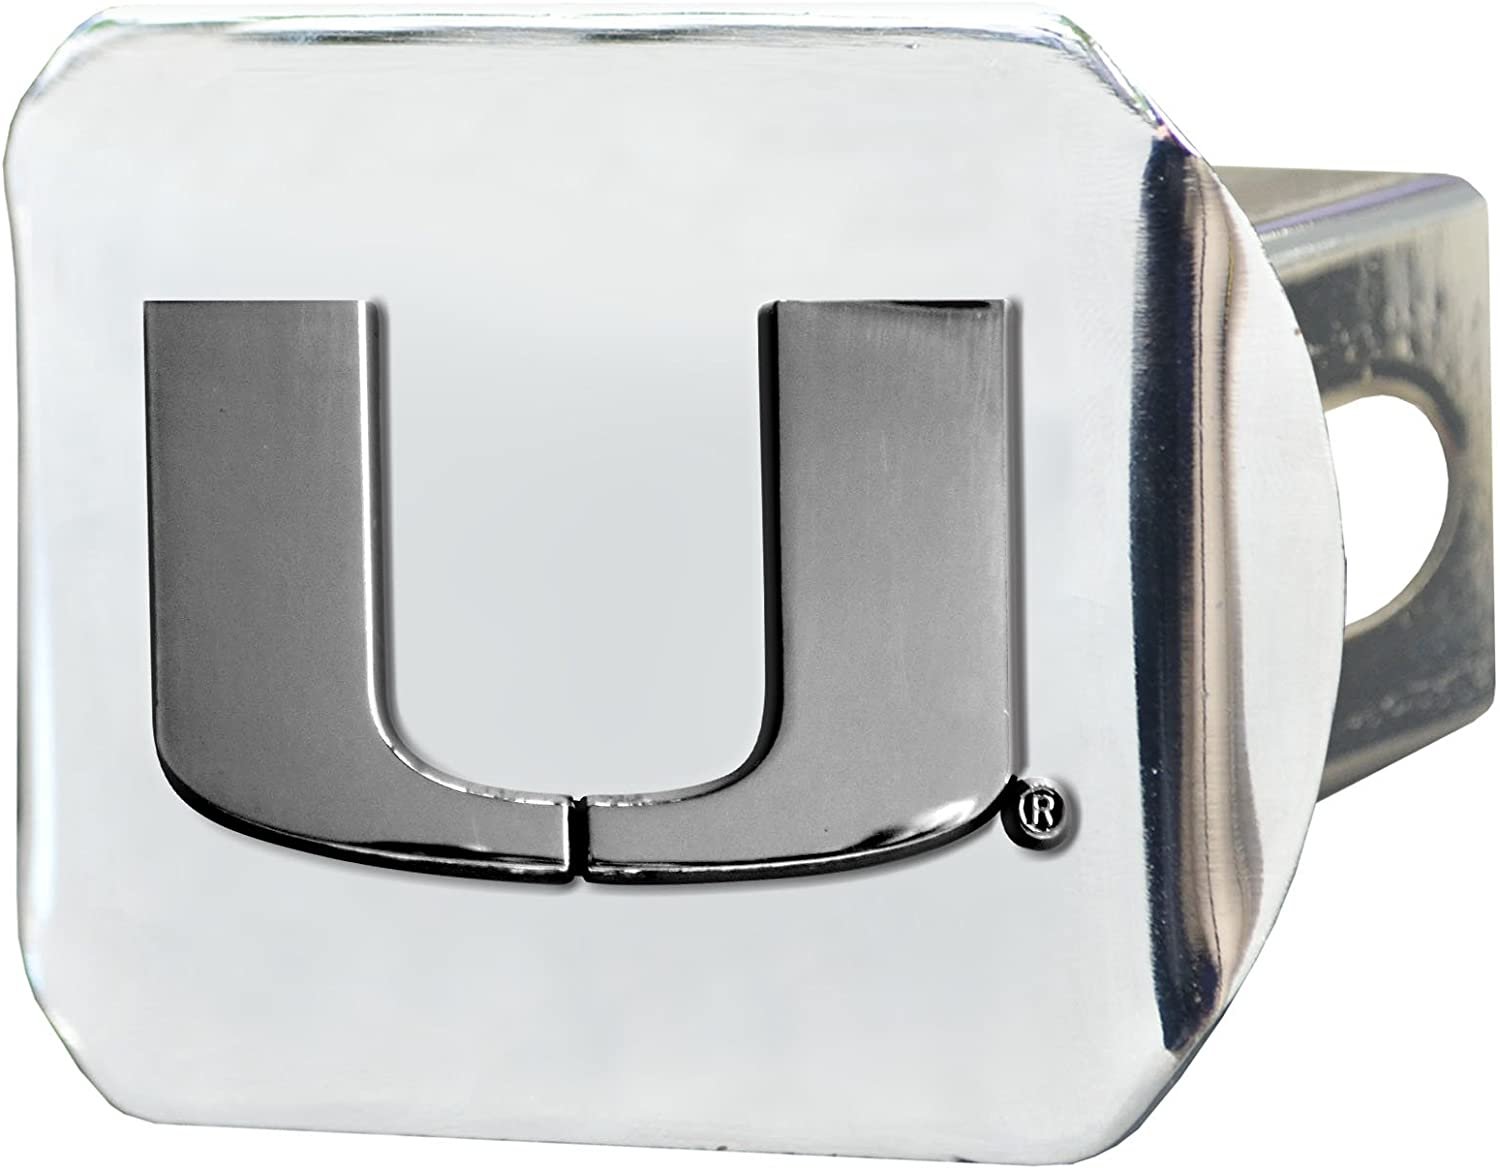 Miami Hurricanes Hitch Cover Solid Metal with Raised Chrome Metal Emblem 2" Square Type III University of